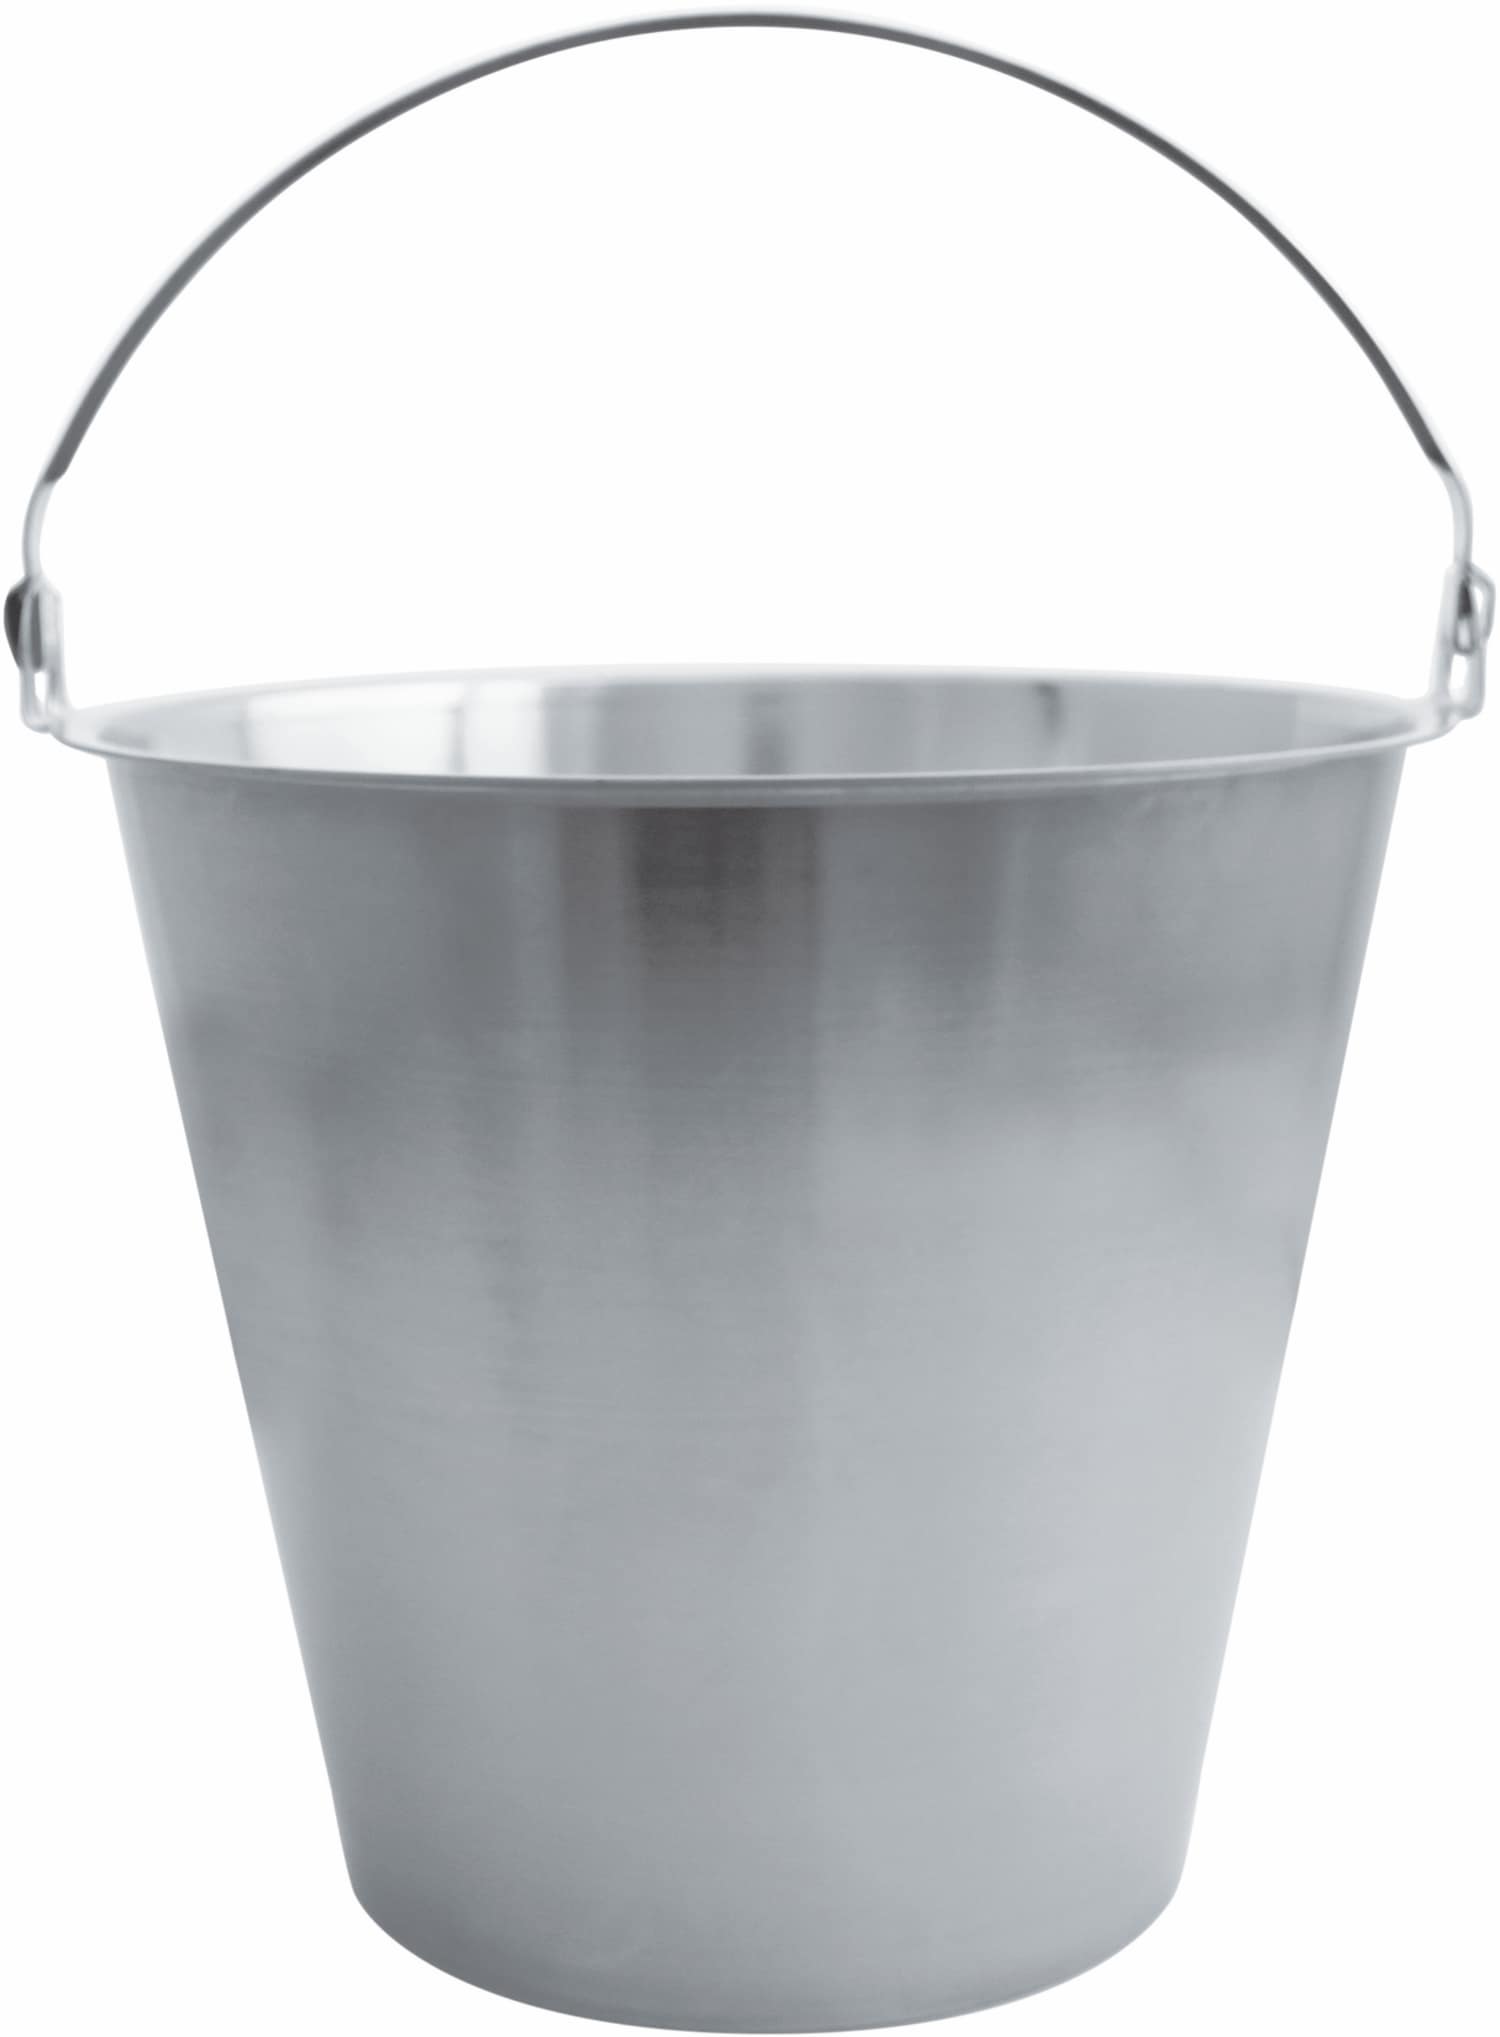 Bucket with flat bottom and inside scale